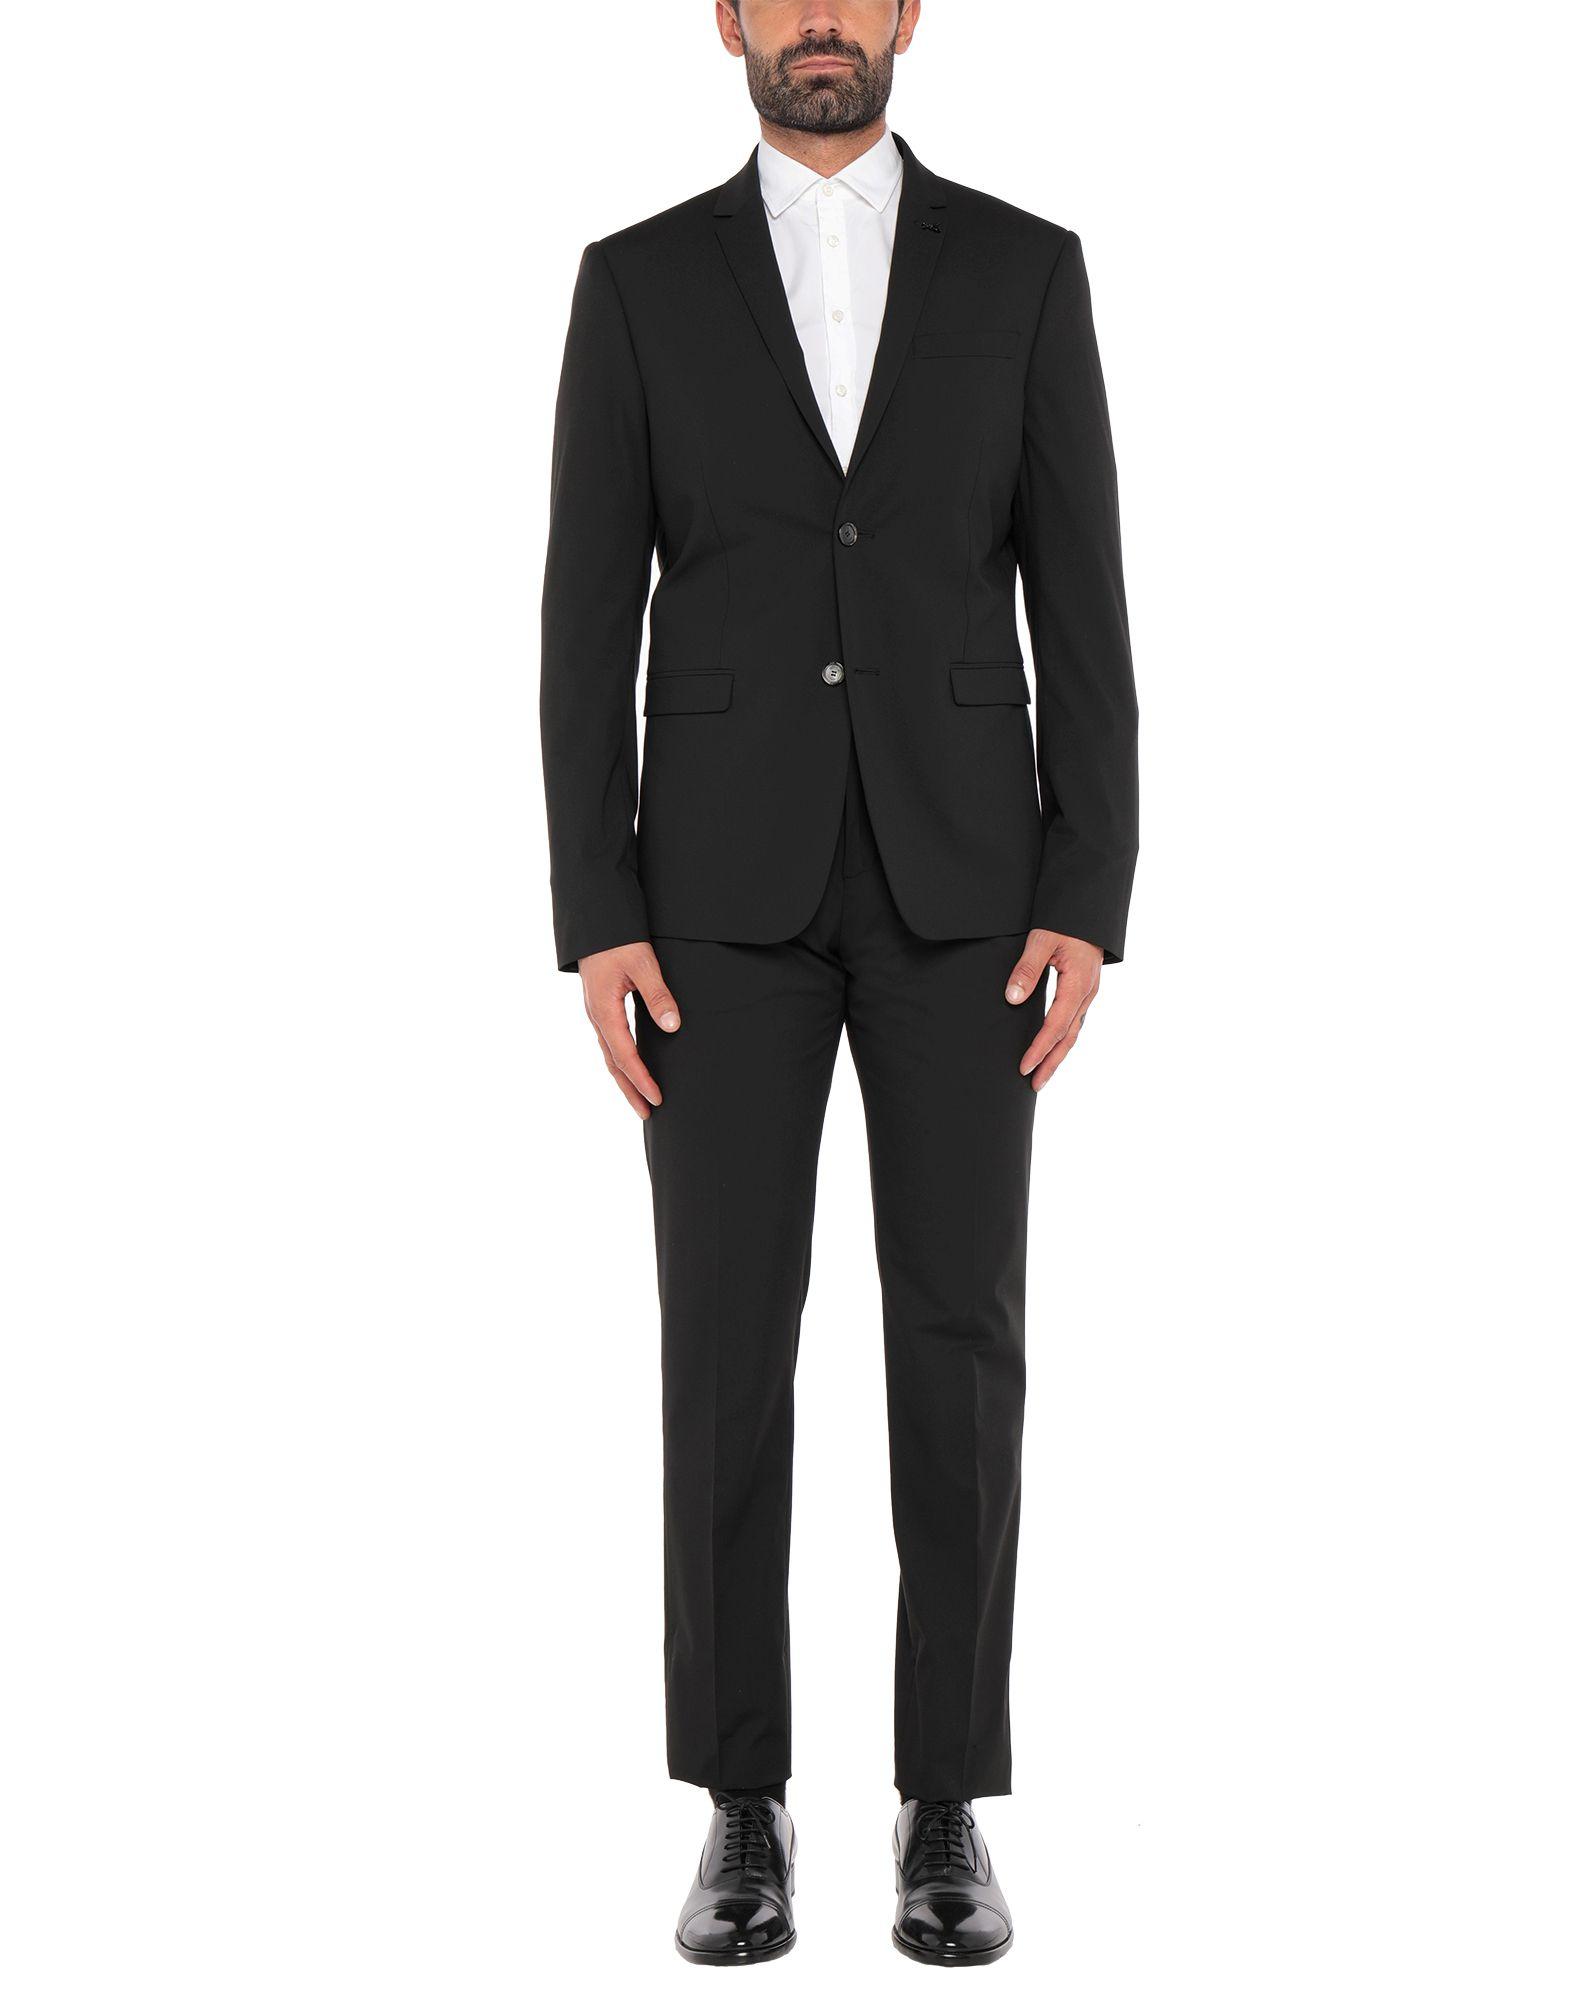 Patrizia Pepe Synthetic Suit in Black for Men - Lyst